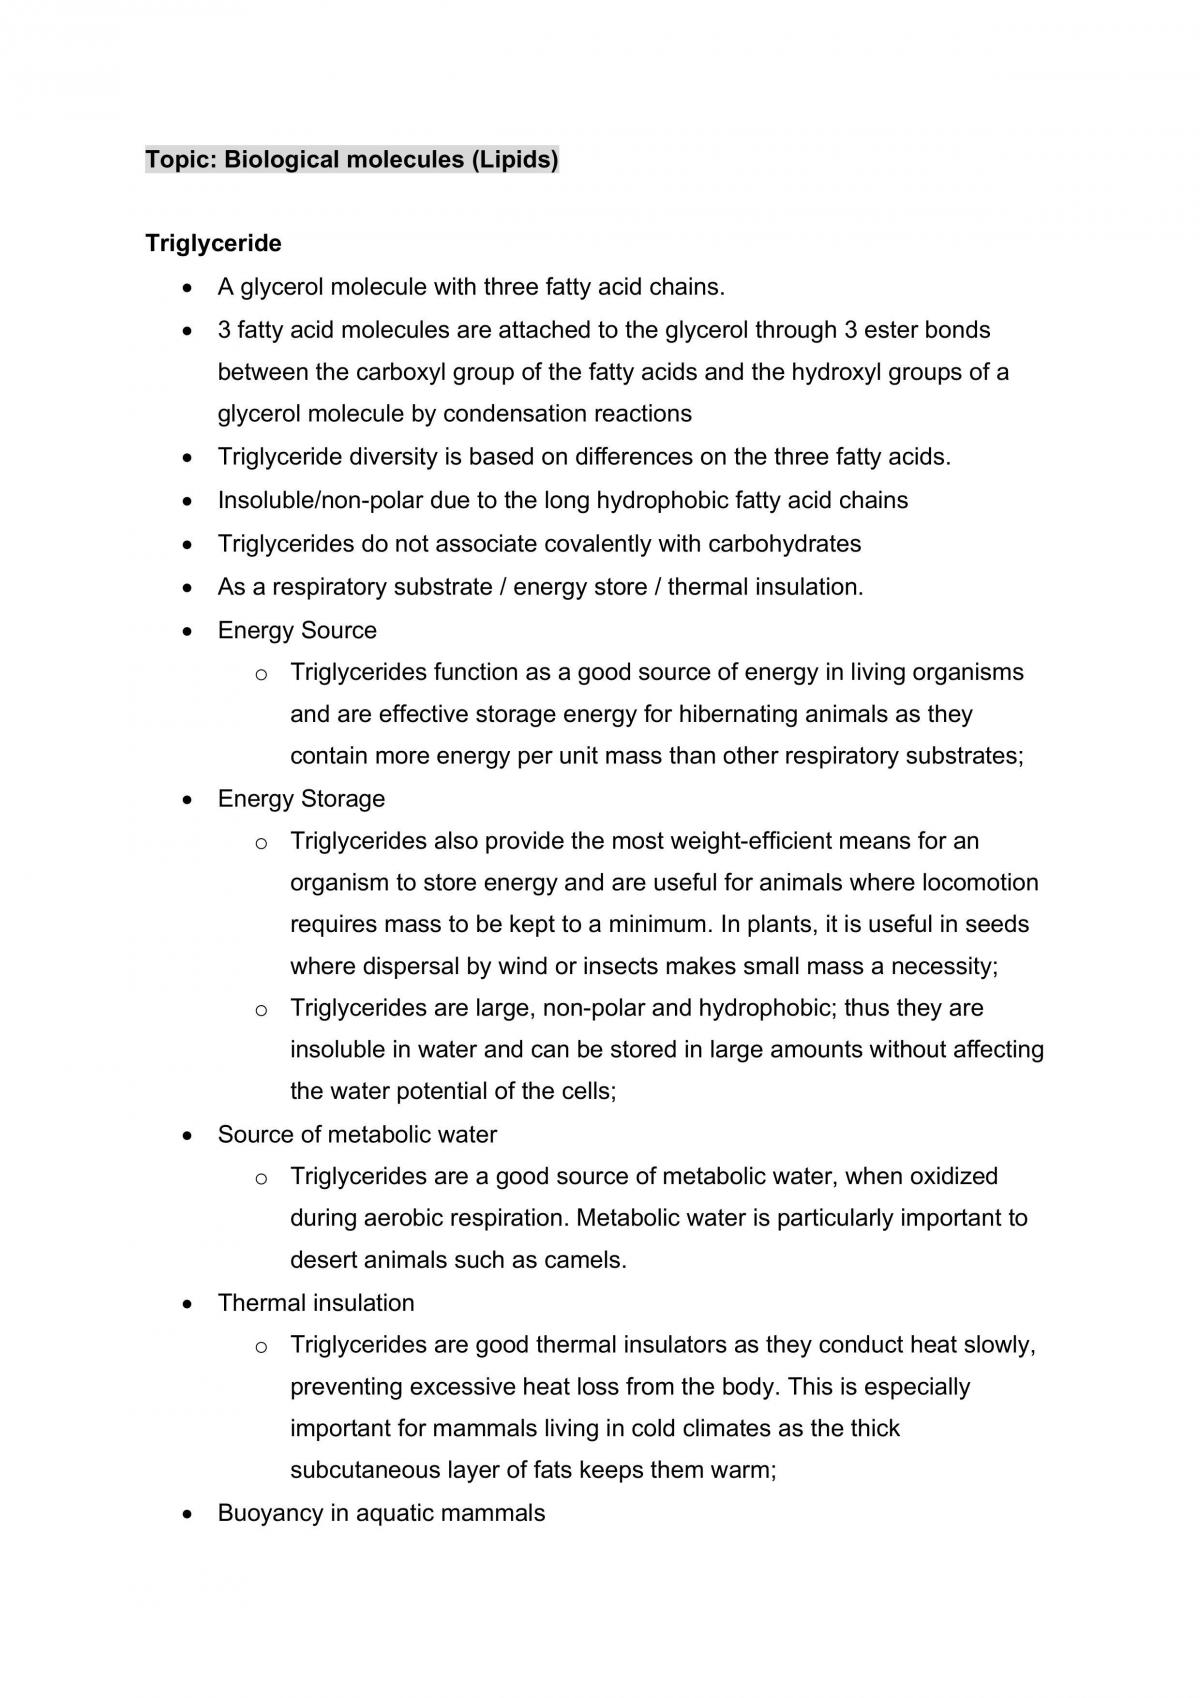 H2 Biology summary notes - Page 5